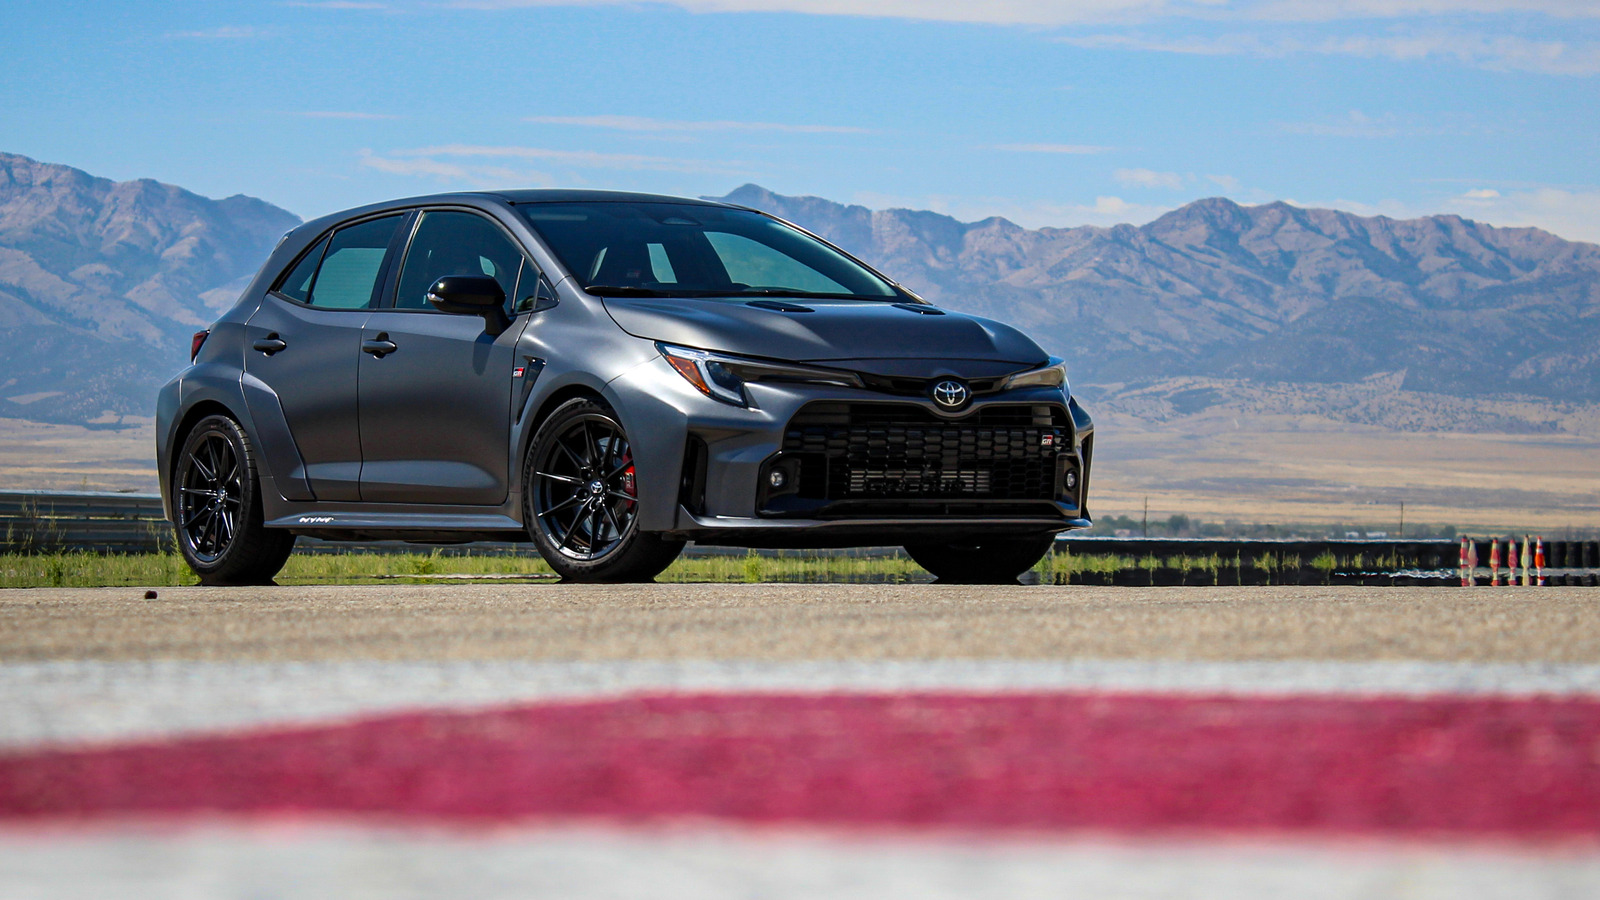 Honda Civic Type R Vs Toyota GR Corolla: Which Hot Hatch Is Right For You? – SlashGear